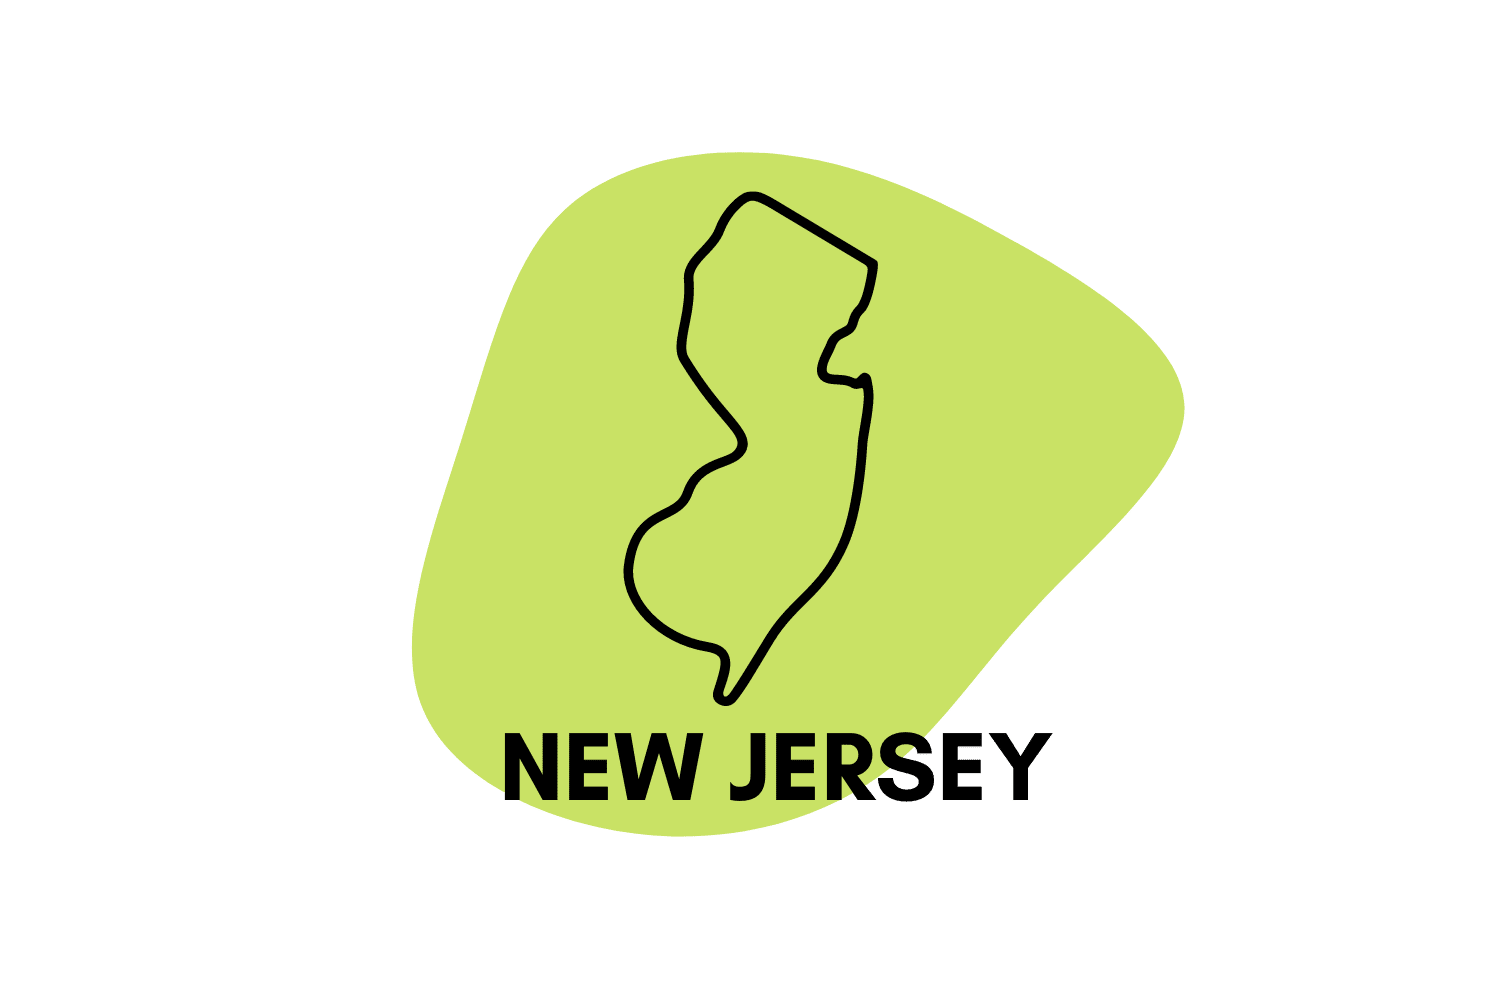 Are Psychedelics Legal In new Jersey?